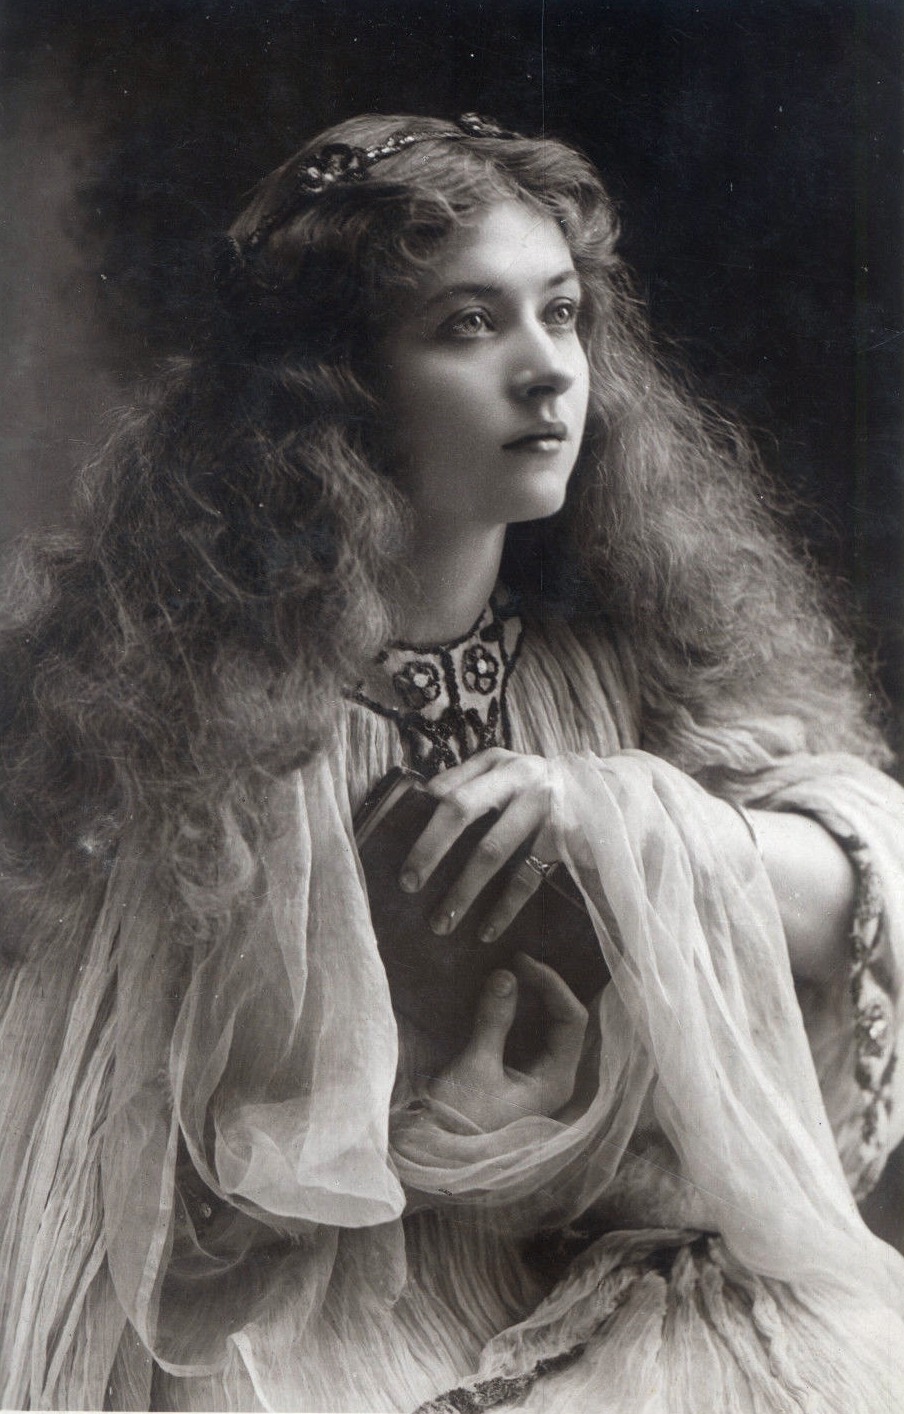 Miss Maud Fealy